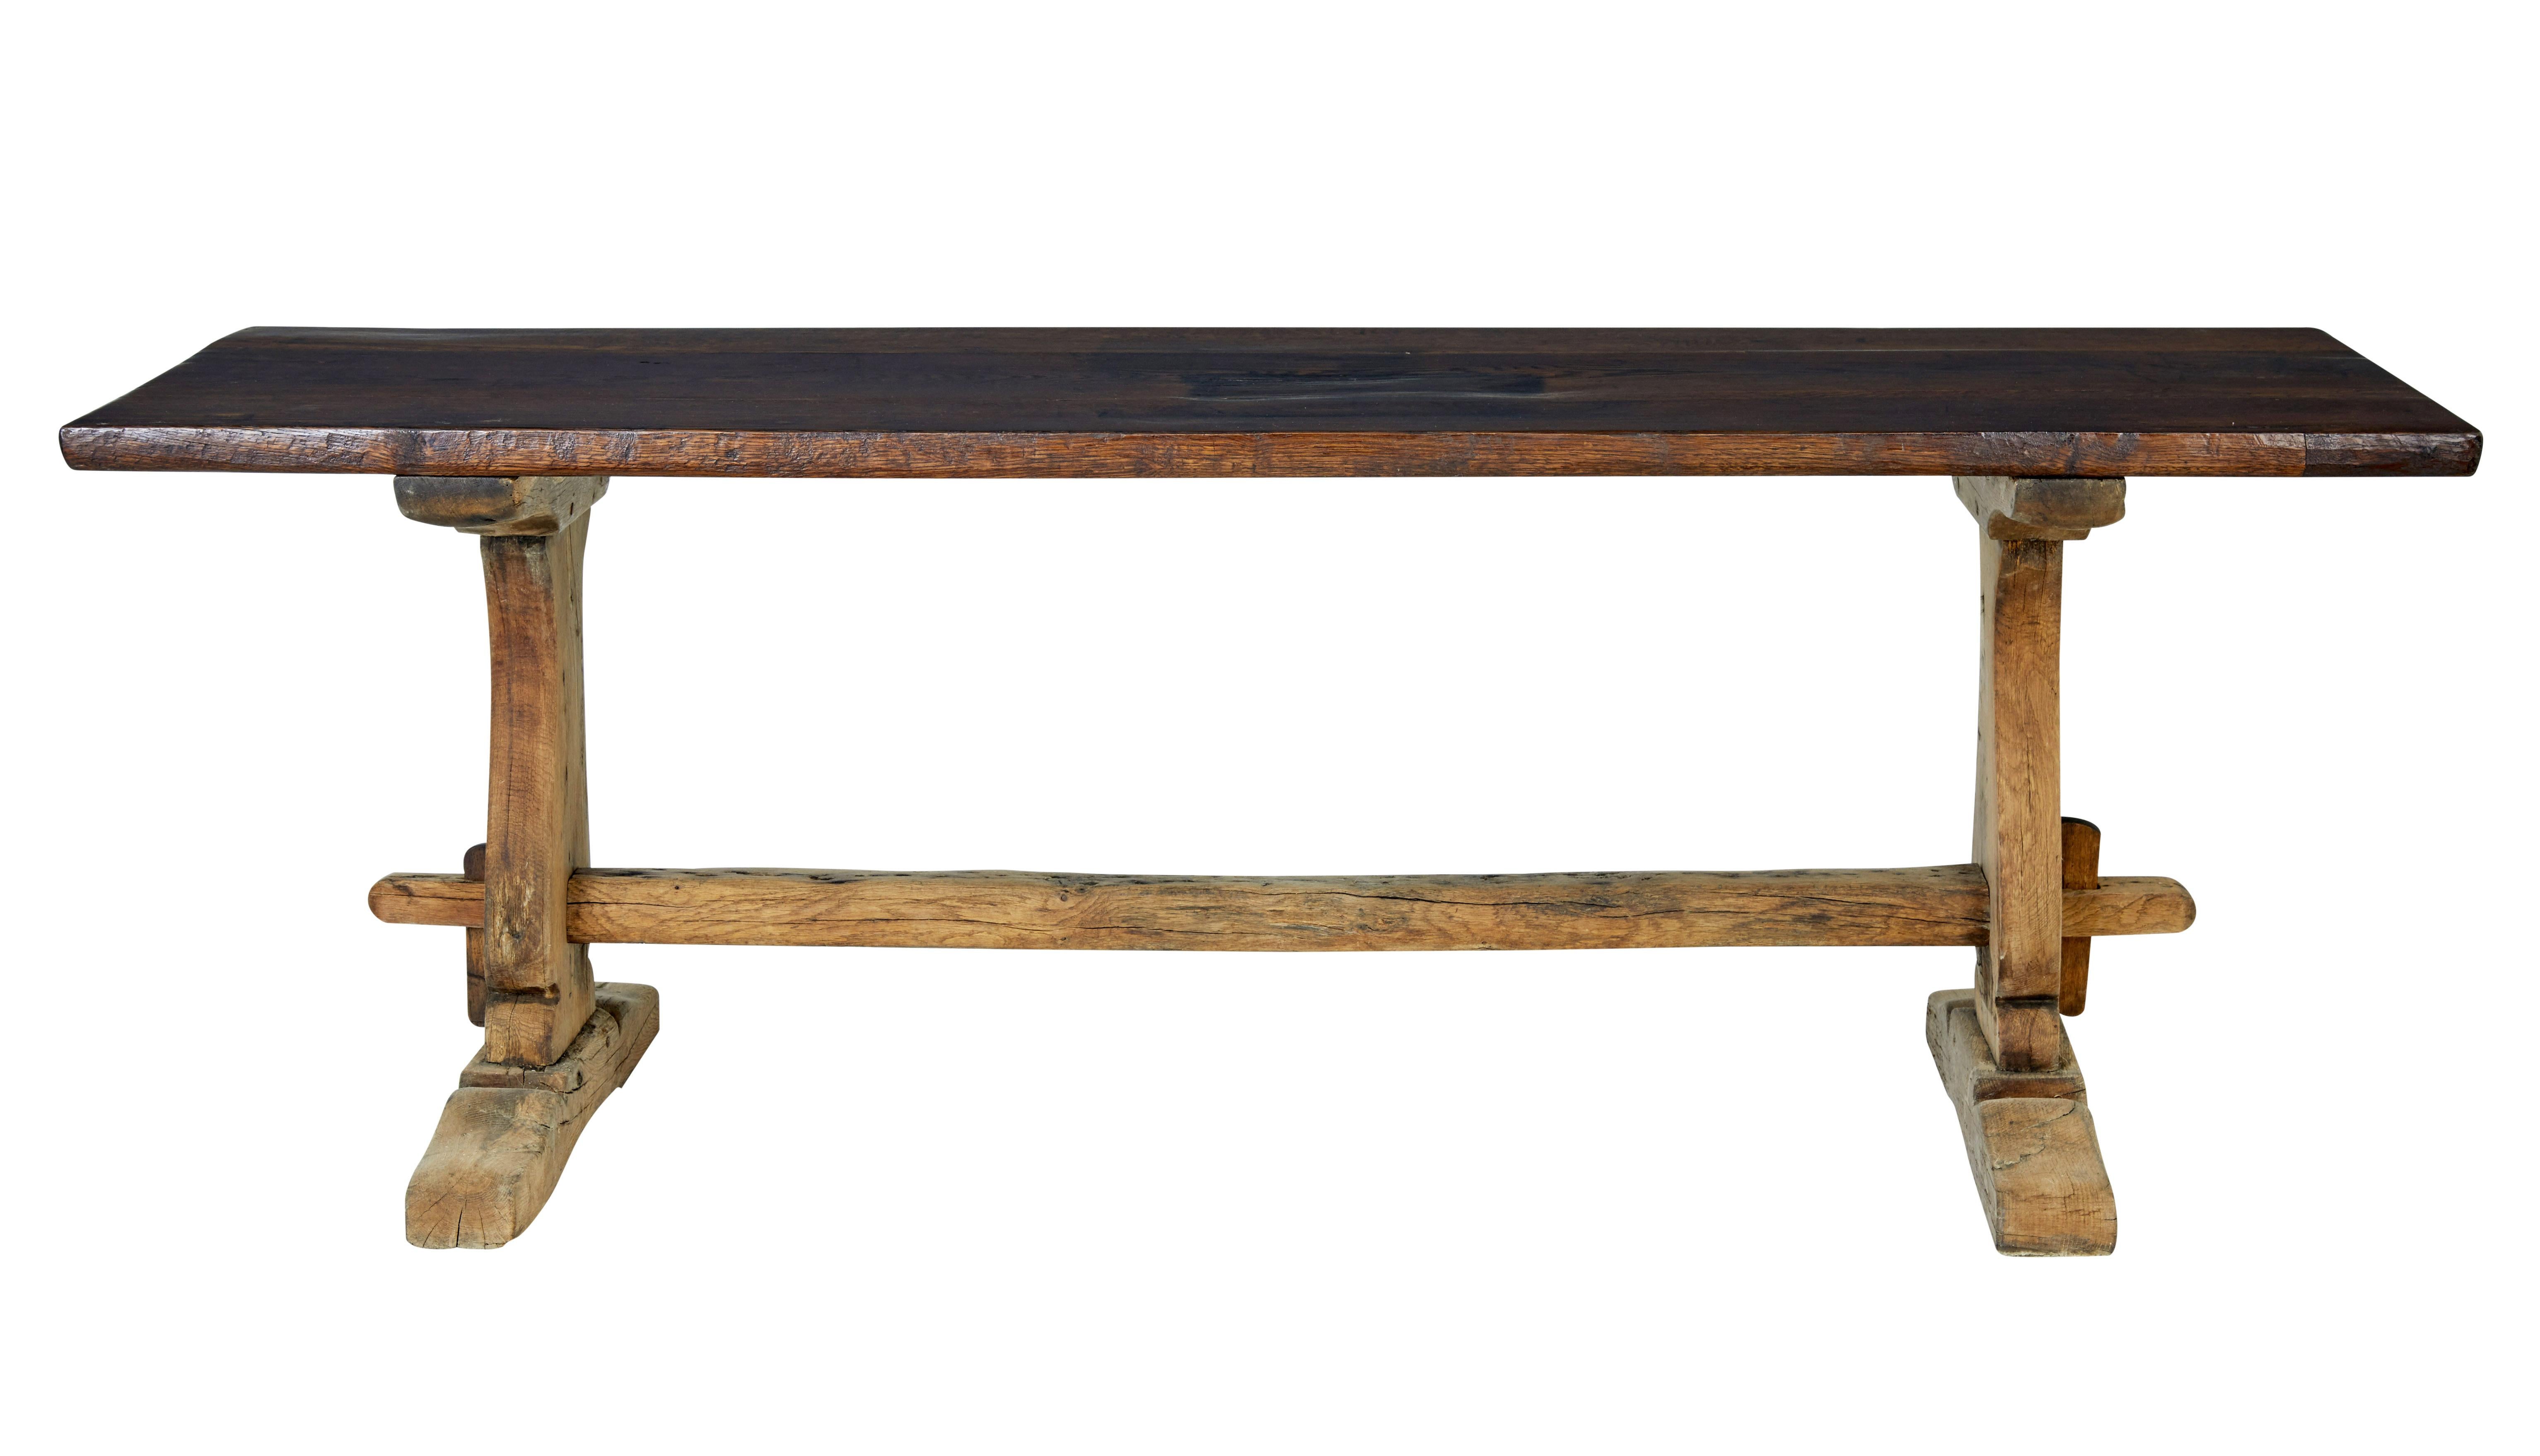 Fine quality oak table, circa 1830.

Contrasting dark top with lighter oak base.

Here we have a table we purchased on our travels in scandinavian, purchased privately from a home who had a large urn sitting on the top for nearly 100 years,